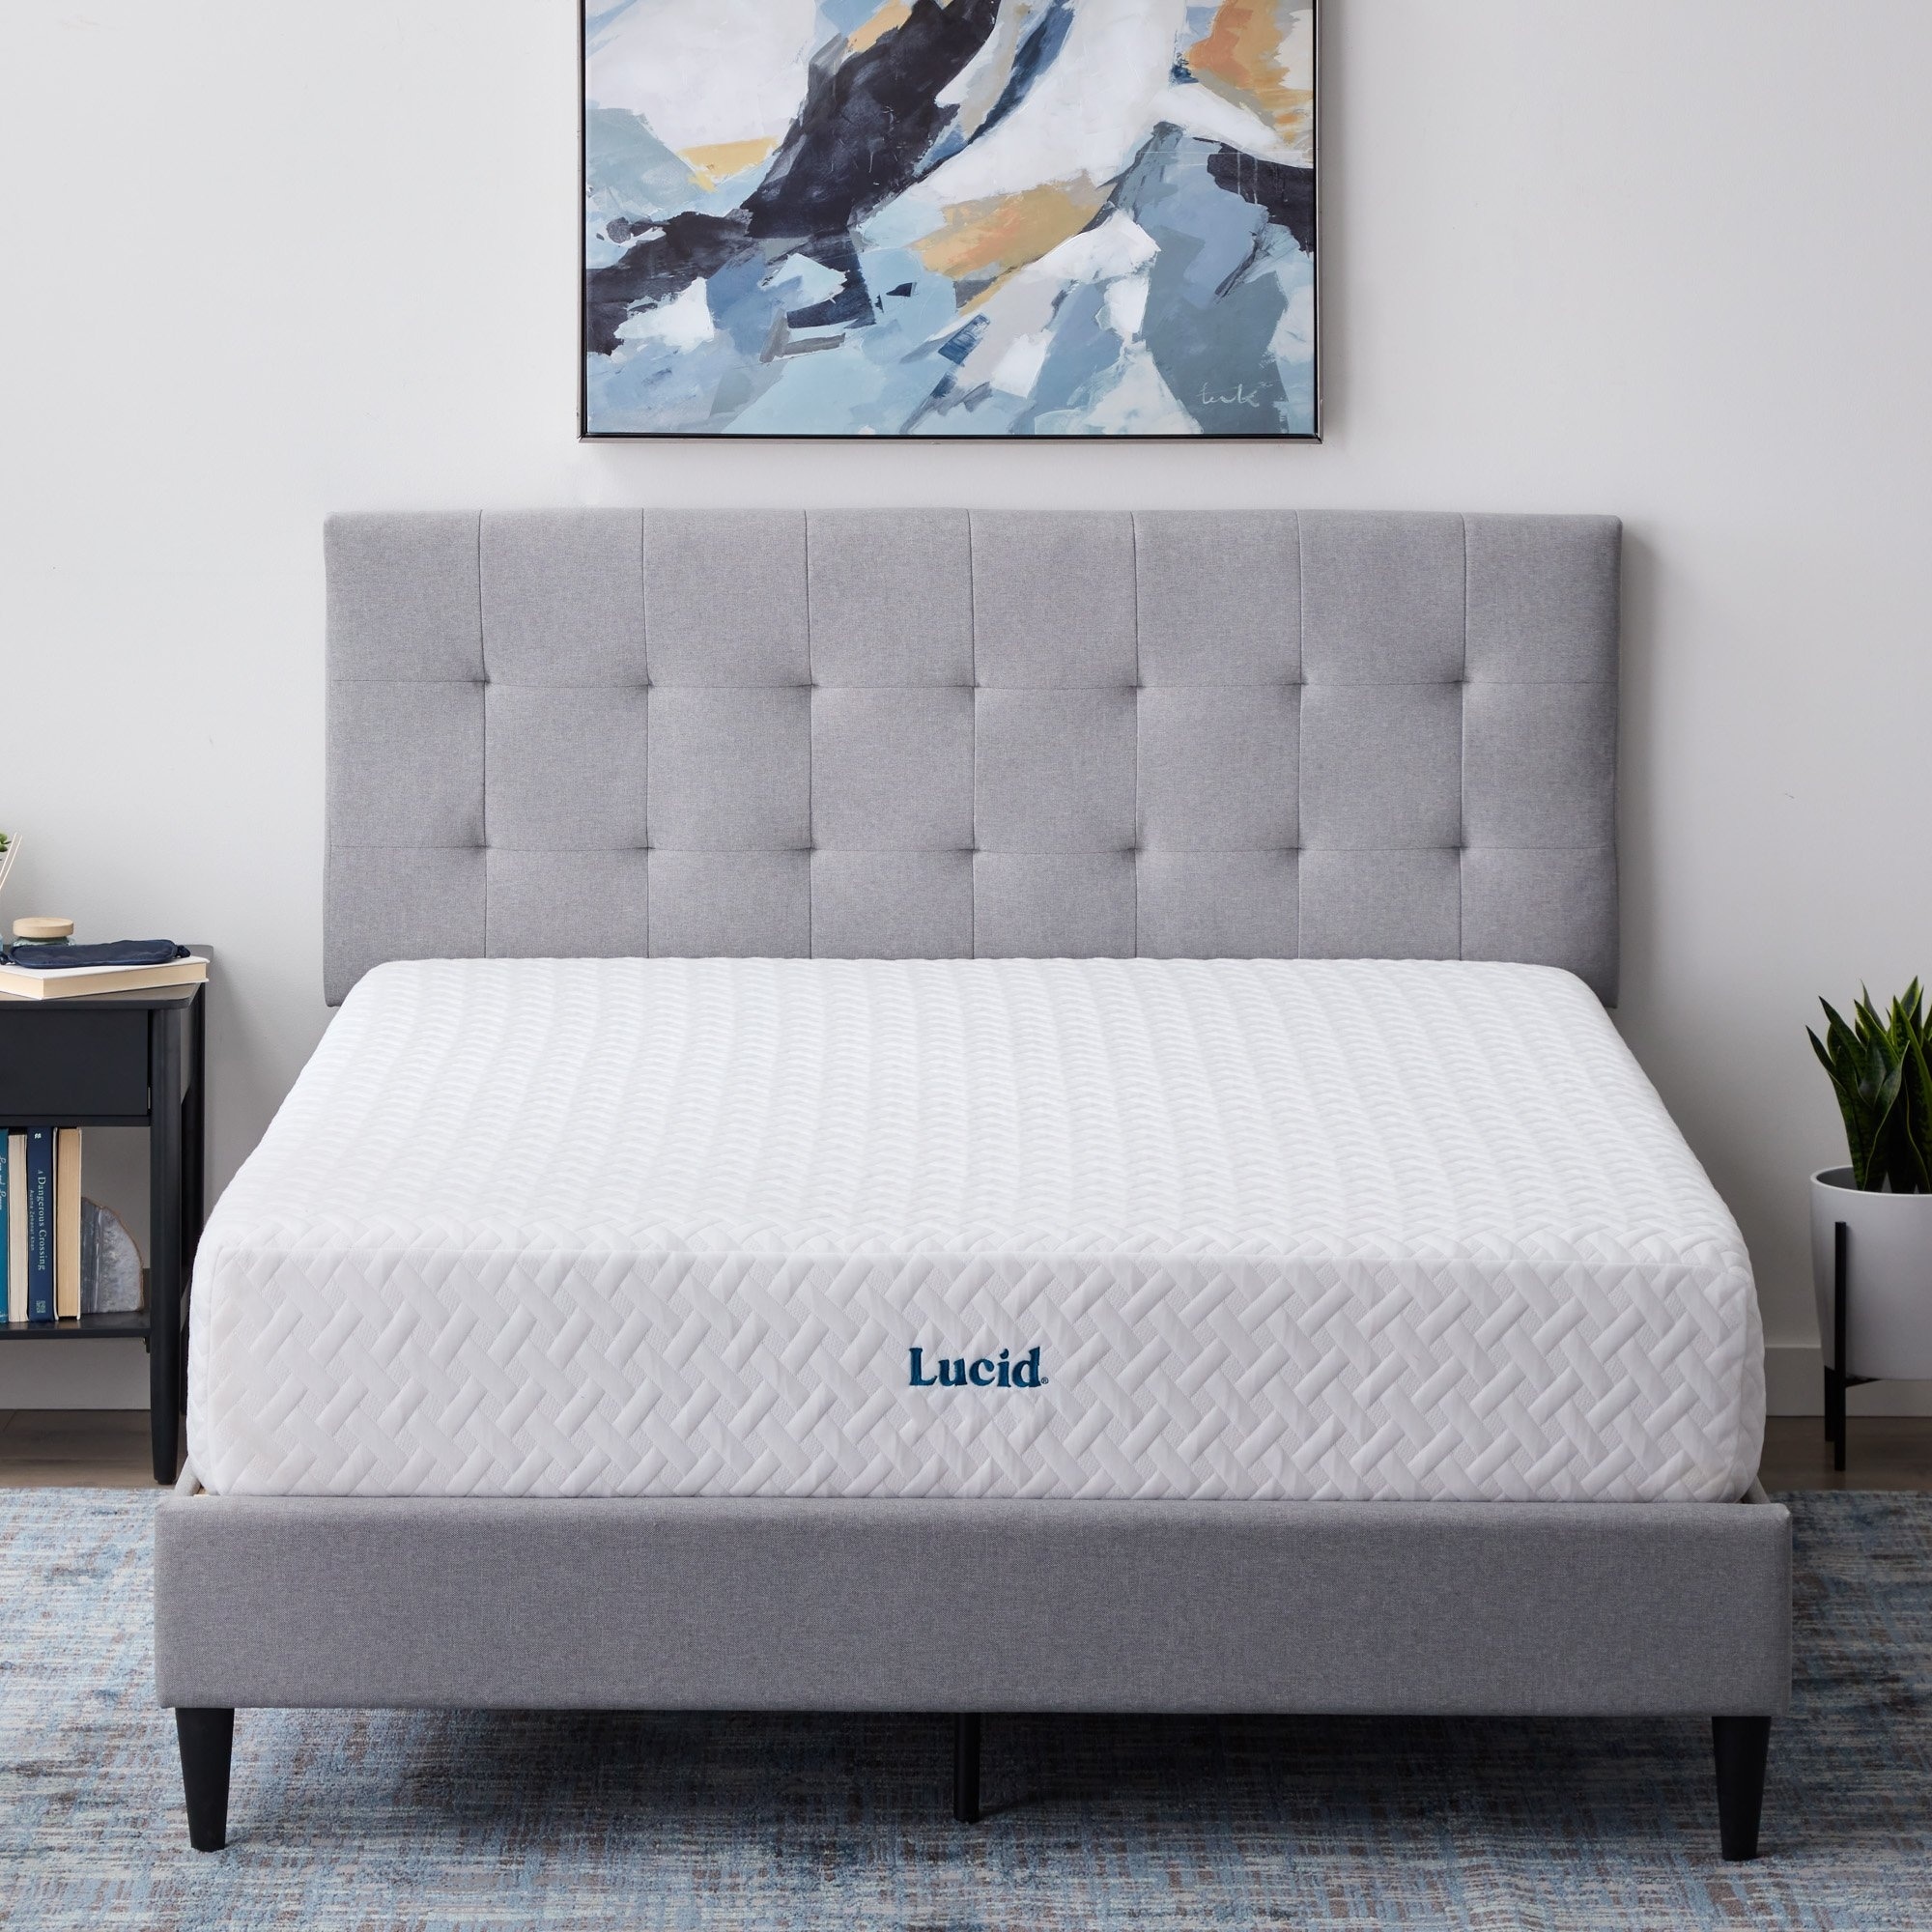 https://ak1.ostkcdn.com/images/products/is/images/direct/fca0fe531649e4dd6779e20b4bfff96f4ac77212/LUCID-Comfort-Collection-10-inch-Luxury-Gel-Memory-Foam-Mattress.jpg